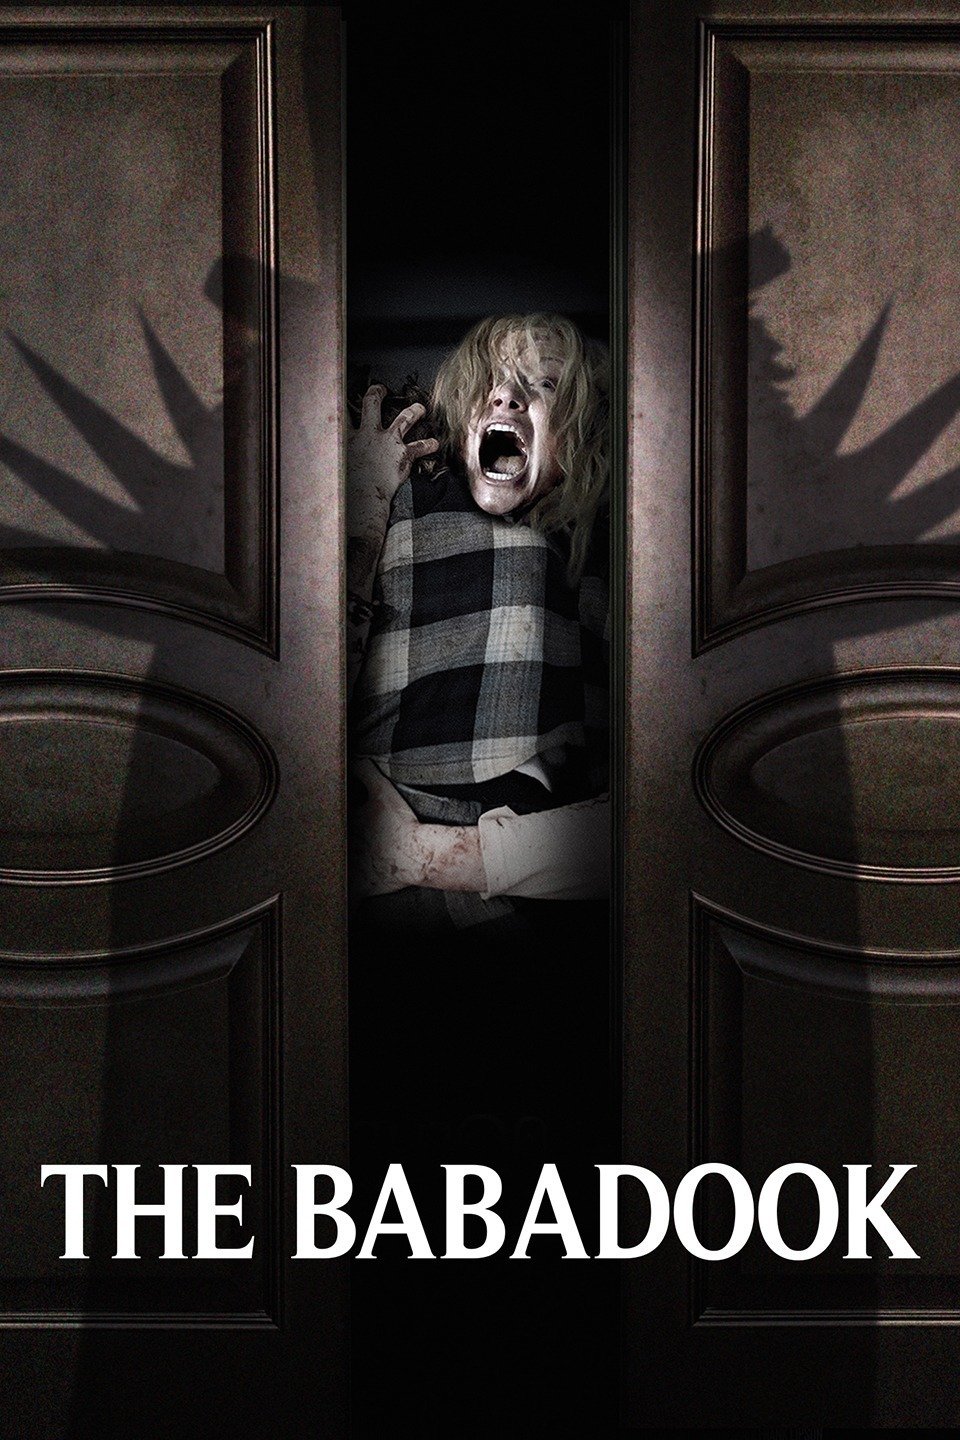 The Babadook - Top 25 Horror Movies of All Time